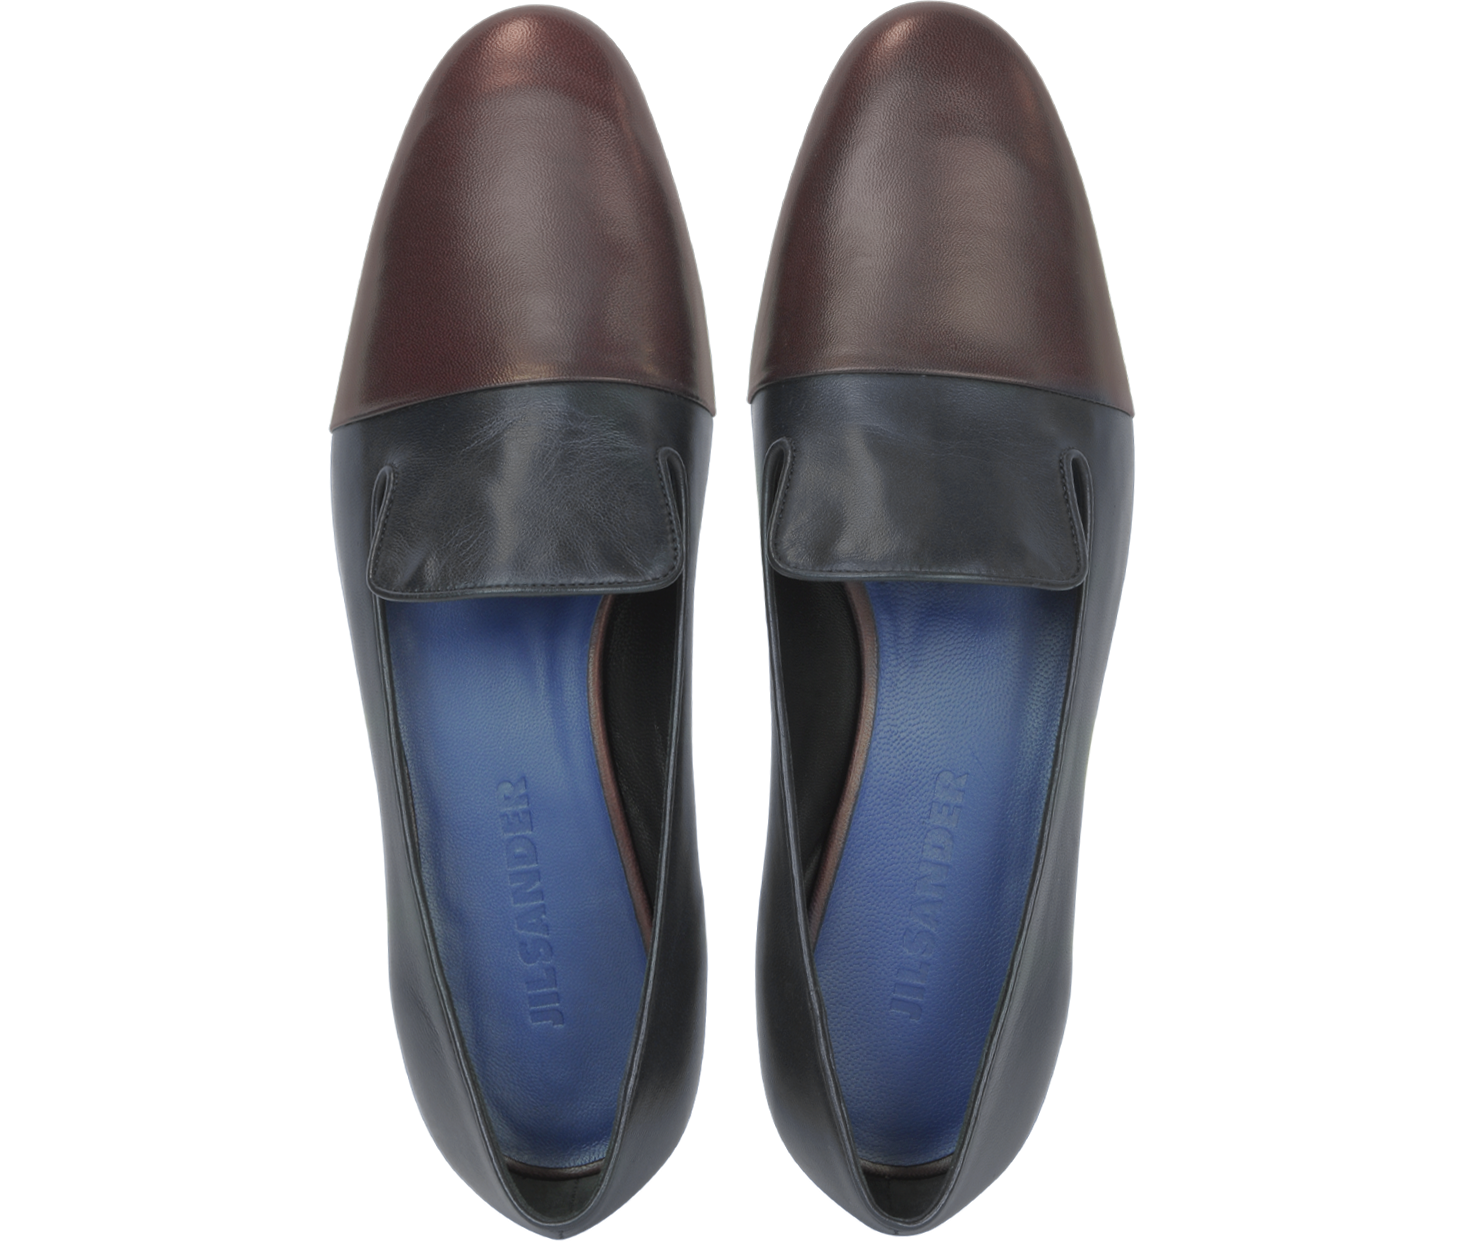 Jil Sander Two Tone Leather Loafer 36 IT/EU at FORZIERI